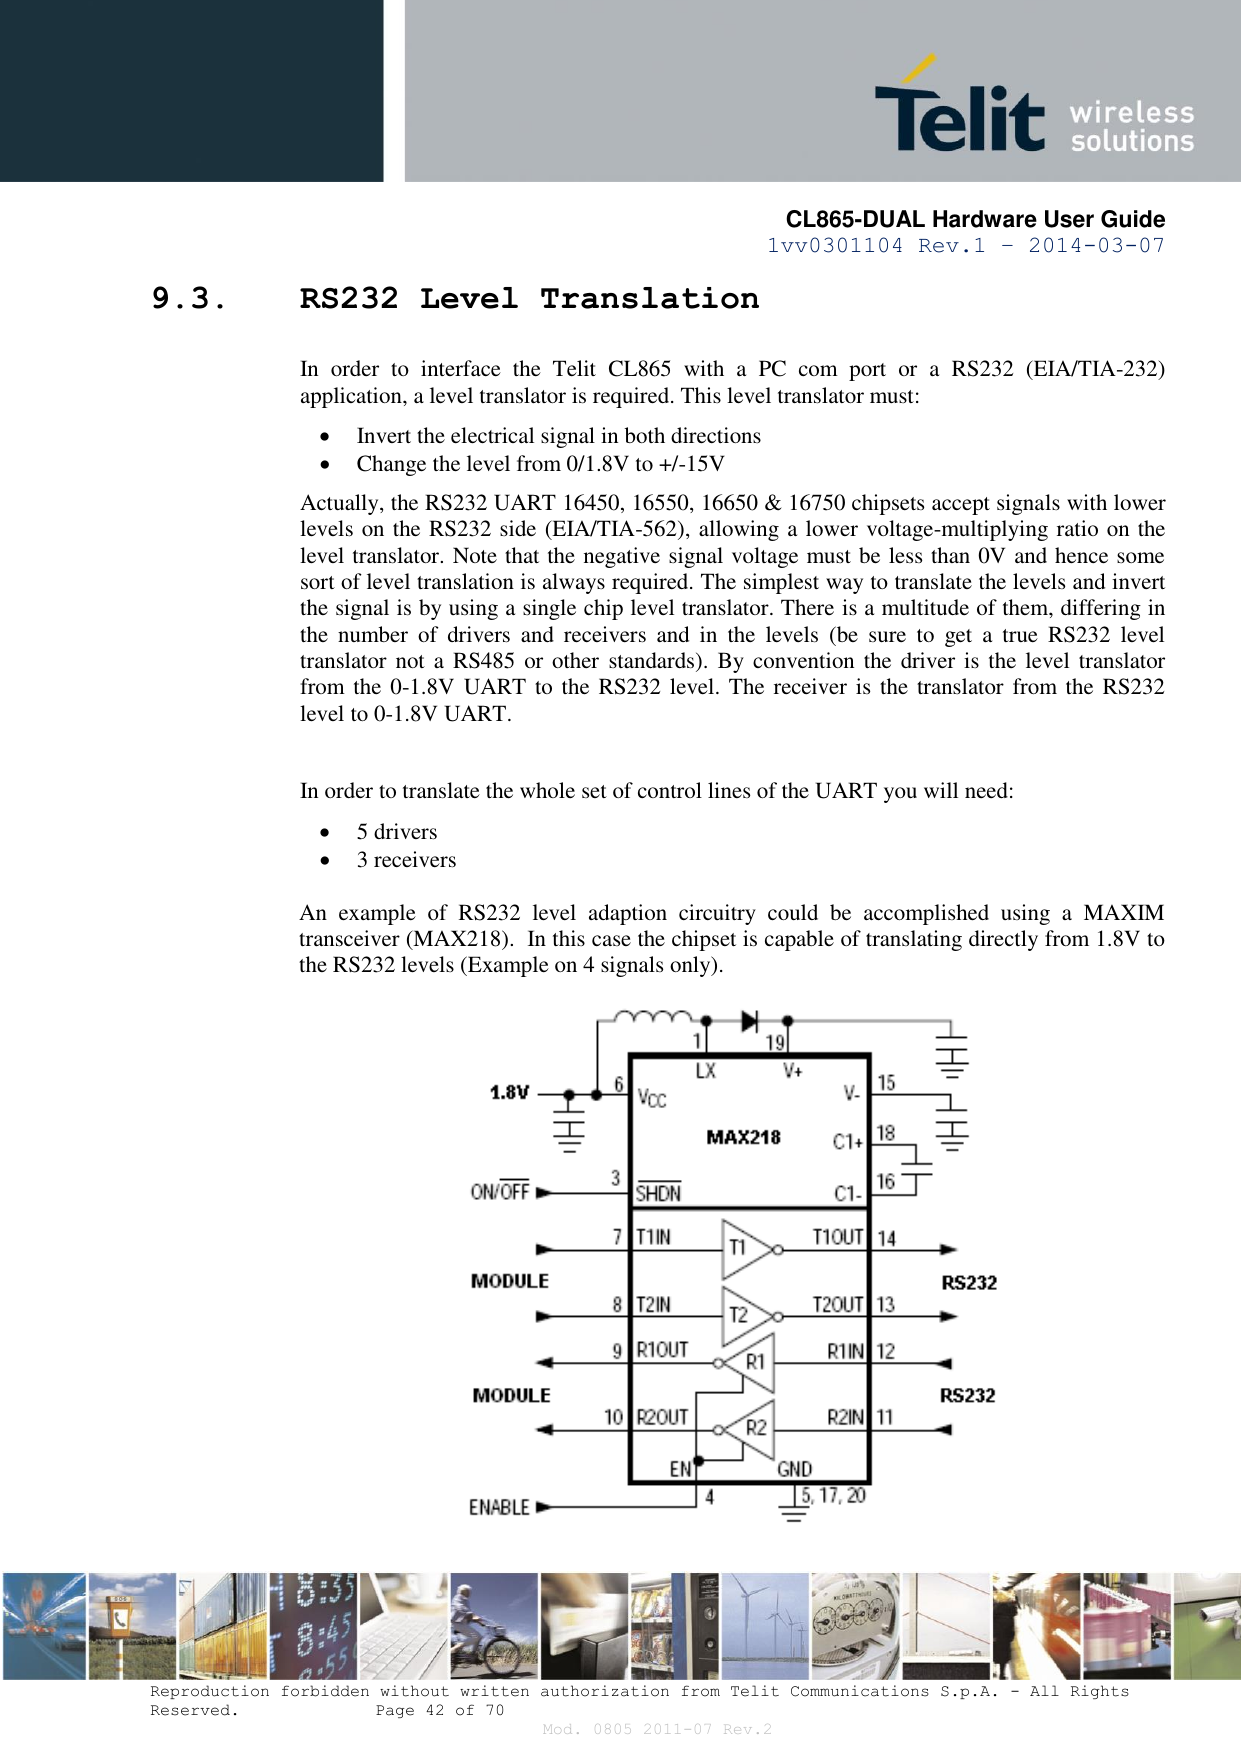       CL865-DUAL Hardware User Guide 1vv0301104 Rev.1 – 2014-03-07  Reproduction forbidden without written authorization from Telit Communications S.p.A. - All Rights Reserved.    Page 42 of 70 Mod. 0805 2011-07 Rev.2 9.3. RS232 Level Translation In  order  to  interface  the  Telit  CL865  with  a  PC  com  port  or  a  RS232  (EIA/TIA-232) application, a level translator is required. This level translator must:  Invert the electrical signal in both directions  Change the level from 0/1.8V to +/-15V Actually, the RS232 UART 16450, 16550, 16650 &amp; 16750 chipsets accept signals with lower levels on the RS232 side (EIA/TIA-562), allowing a lower voltage-multiplying ratio on the level translator. Note that the negative signal voltage must be less than 0V and hence some sort of level translation is always required. The simplest way to translate the levels and invert the signal is by using a single chip level translator. There is a multitude of them, differing in the  number  of  drivers  and  receivers  and  in  the  levels  (be  sure  to  get  a  true  RS232  level translator not  a  RS485 or other  standards). By convention the driver is the level translator from the  0-1.8V UART to the RS232 level. The receiver is the translator from the RS232 level to 0-1.8V UART.  In order to translate the whole set of control lines of the UART you will need:  5 drivers  3 receivers  An  example  of  RS232  level  adaption  circuitry  could  be  accomplished  using  a  MAXIM transceiver (MAX218).  In this case the chipset is capable of translating directly from 1.8V to the RS232 levels (Example on 4 signals only).   